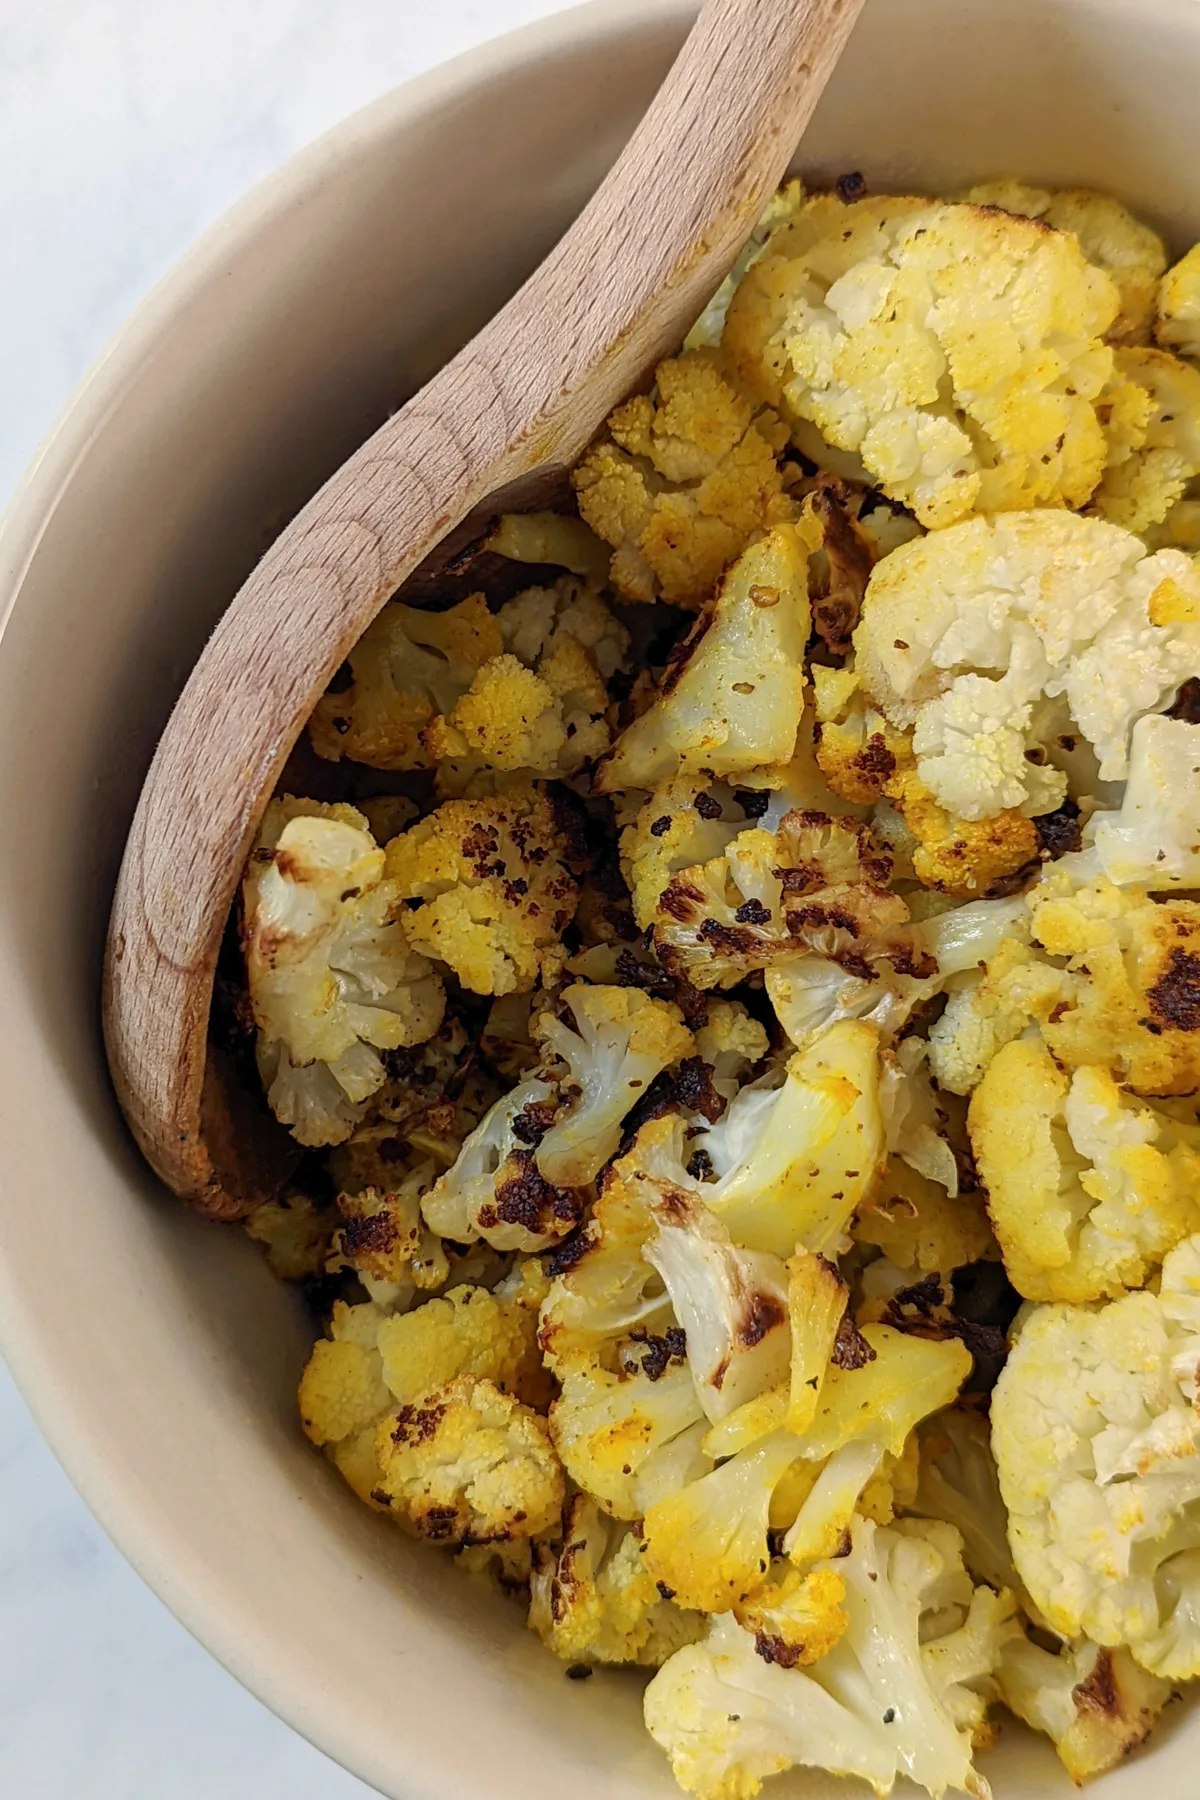 Turmeric Roasted Cauliflower in a serving bowl.